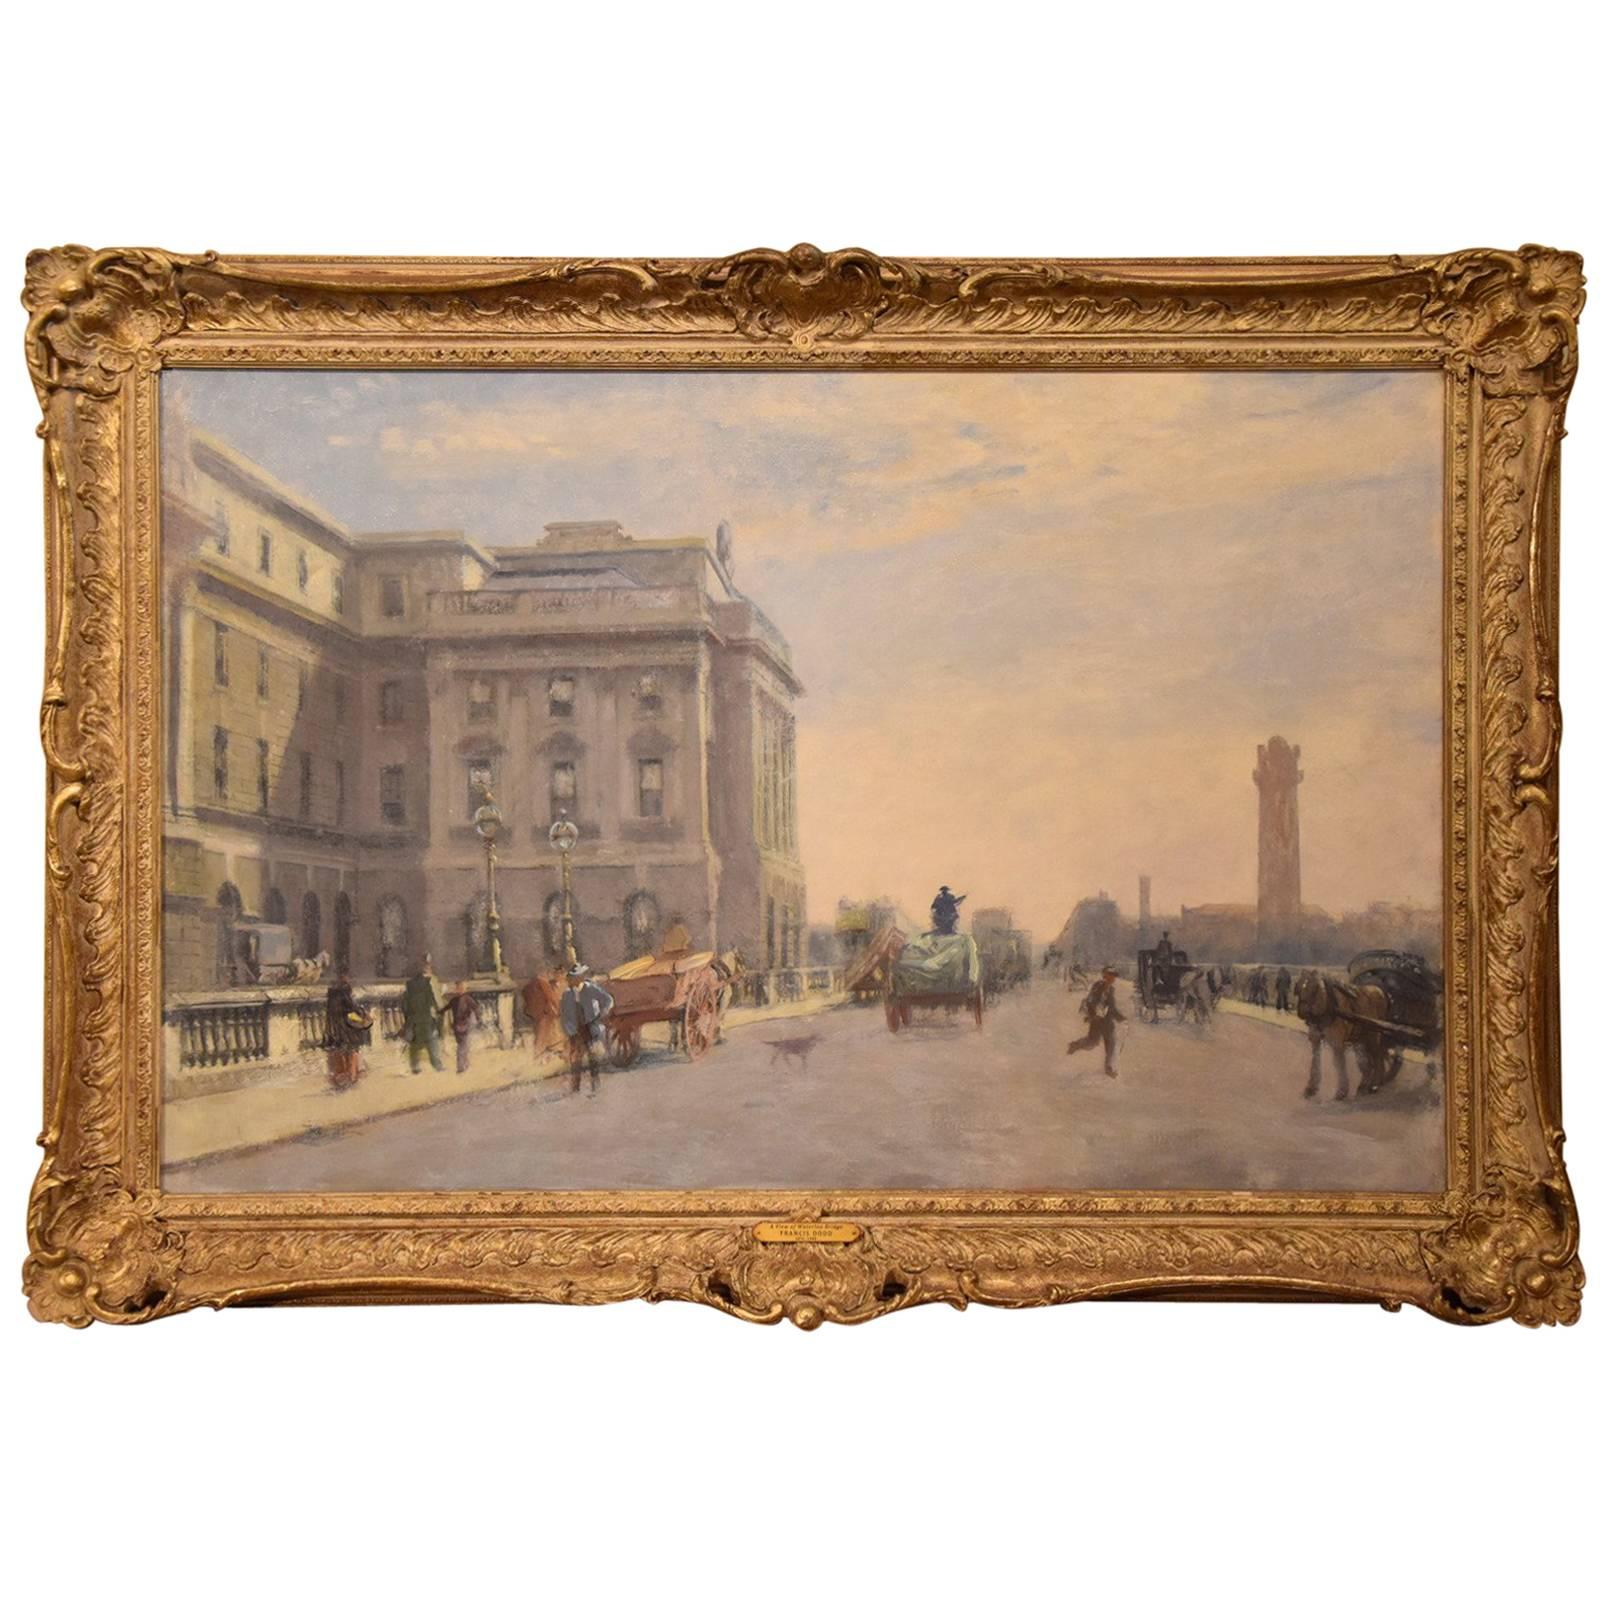 "Waterloo Bridge from Somerset House" by Francis Dodd